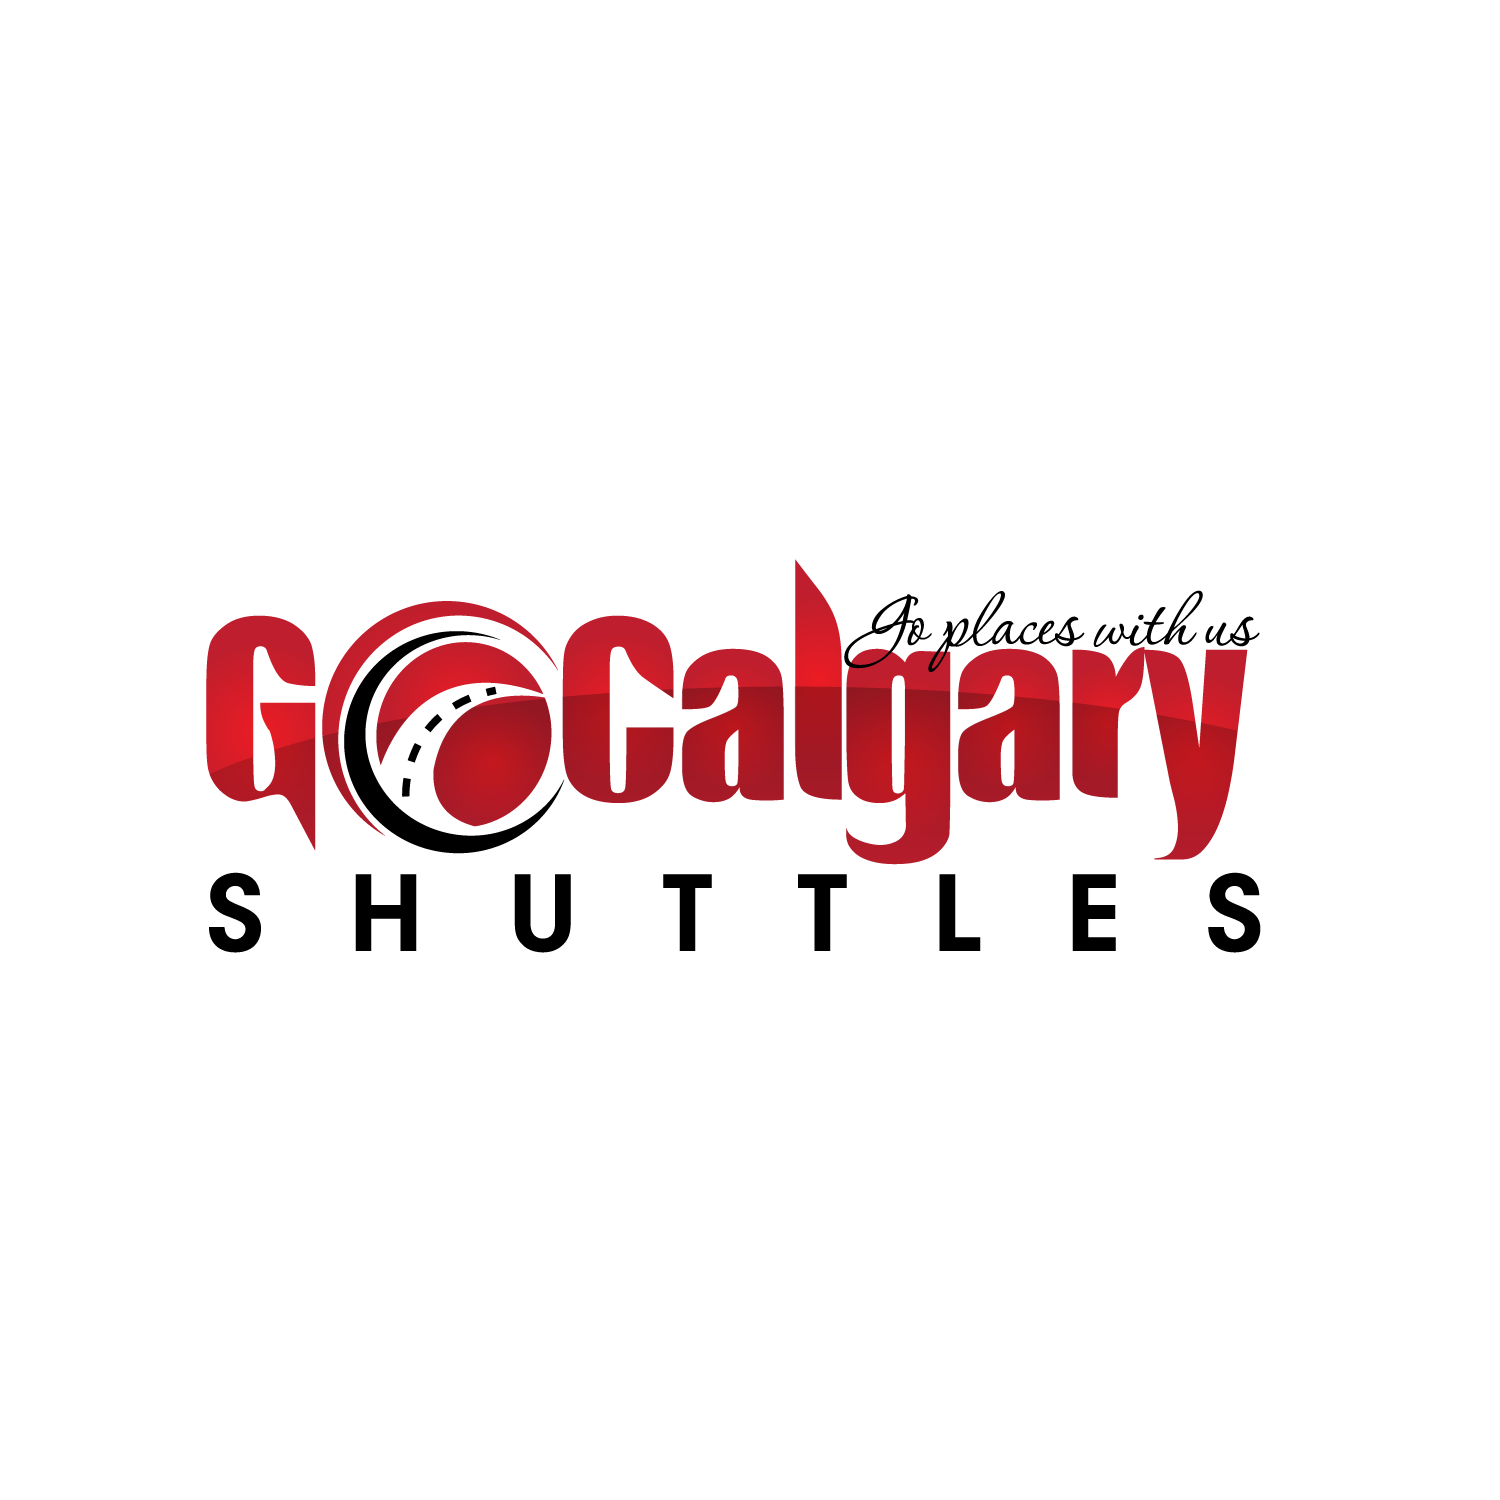 Go Calgary Shuttles is a registered bus charter company that operates in Western Canada including Alberta, British Columbia.